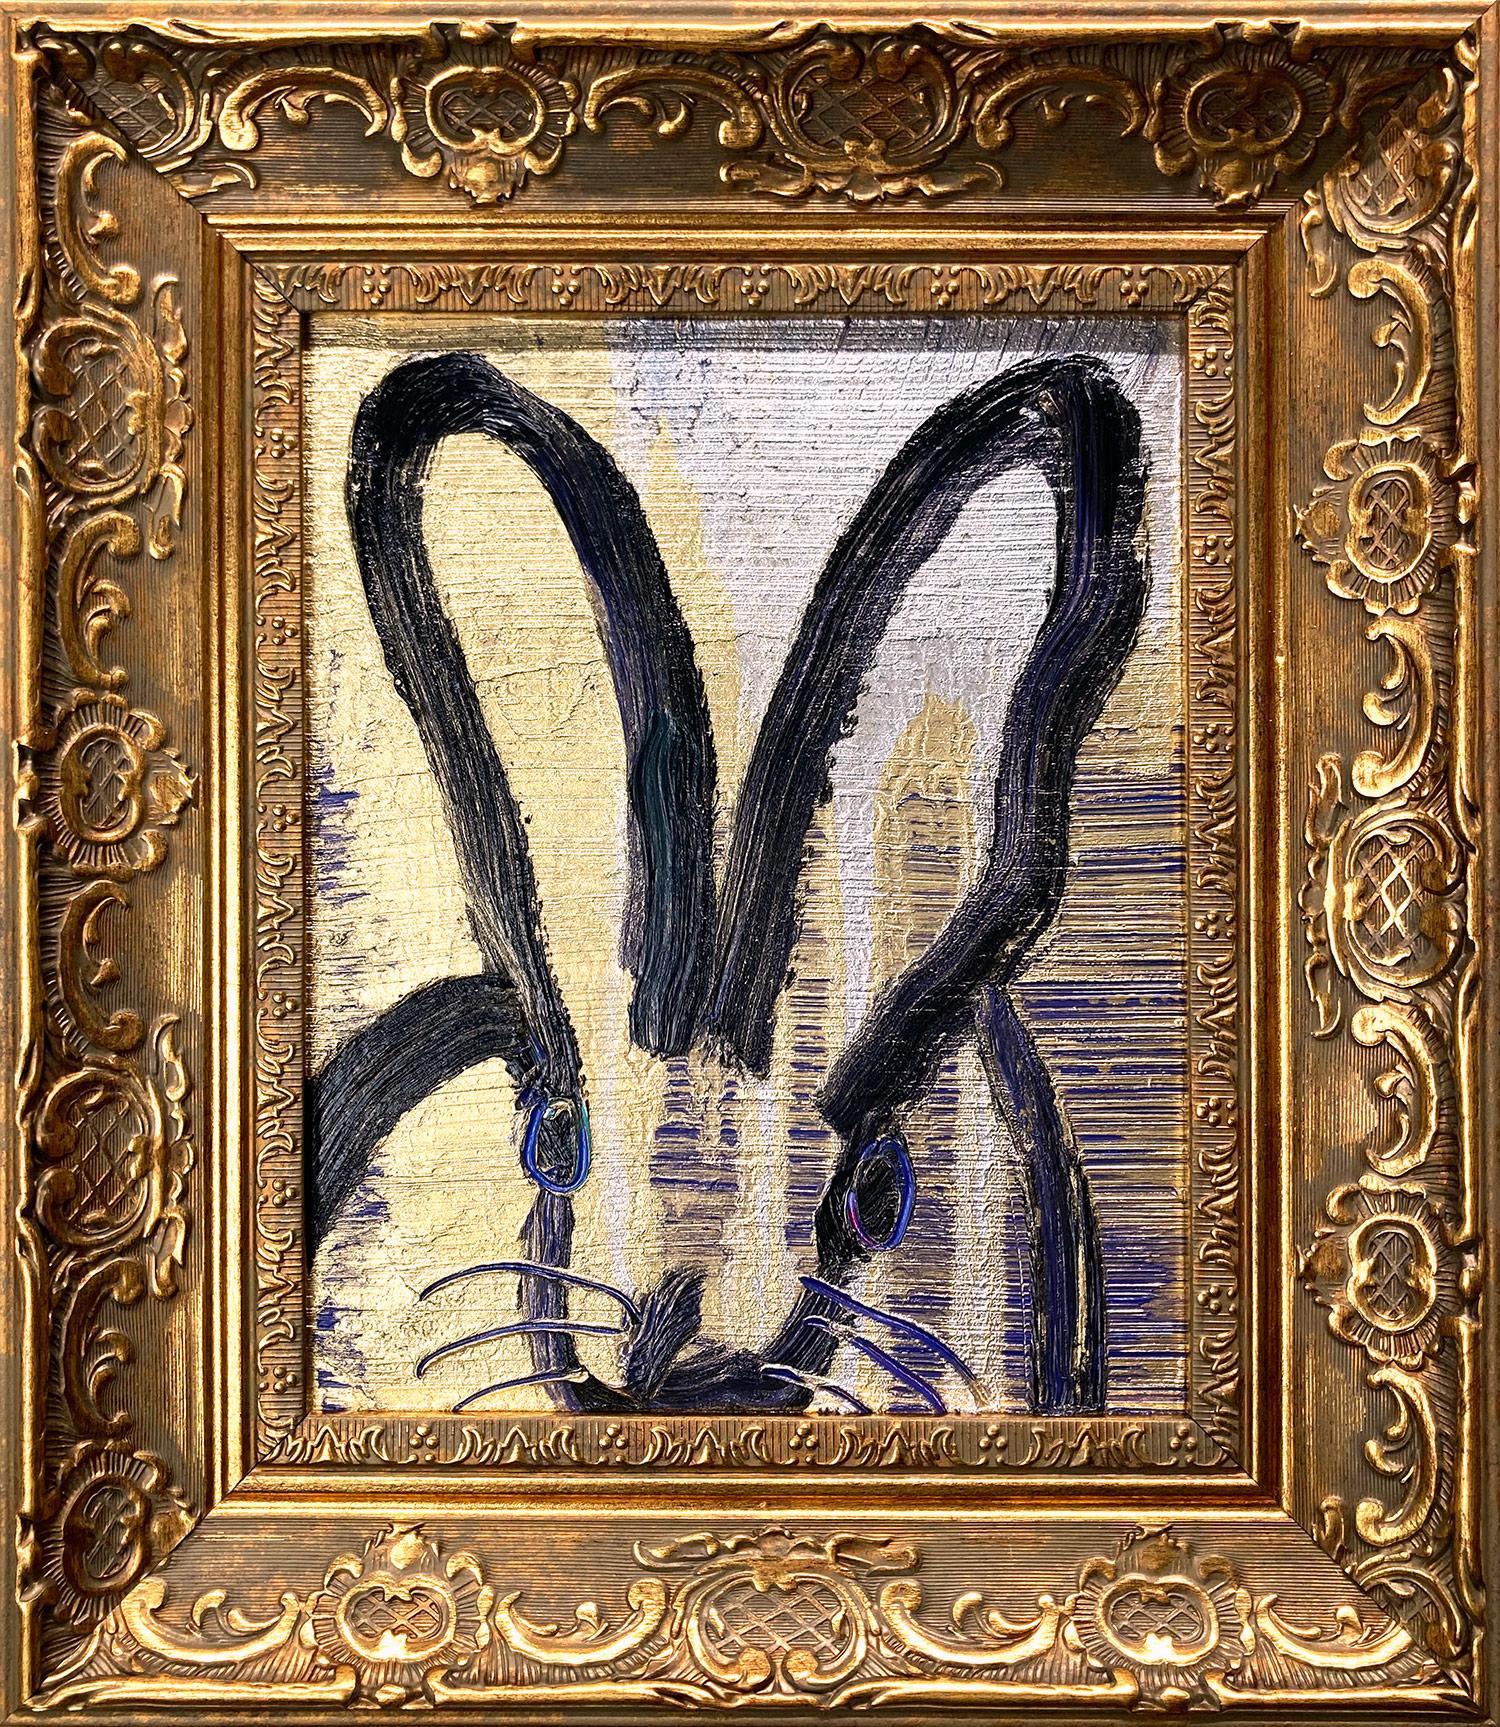 Hunt Slonem Animal Painting - "Rex" Black Bunny on Navy Blue Background with Silver & Gold Painting